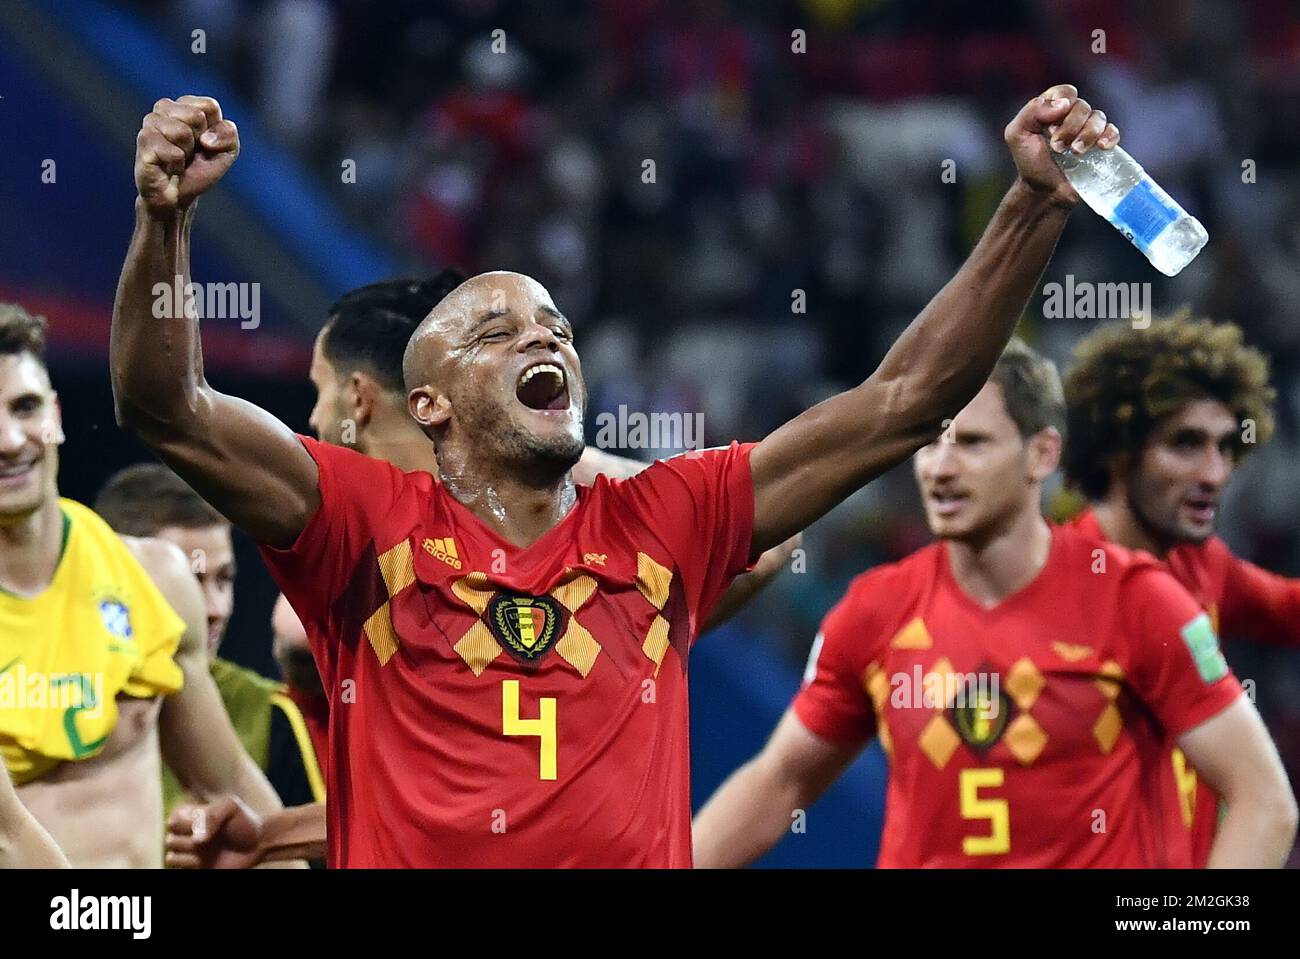 Belgium's Vincent Kompany celebrates after winning a soccer game between Belgian national soccer team the Red Devils and Brazil in Kazan, Russia, Friday 06 July 2018, the quarter-finals of the 2018 FIFA World Cup. BELGA PHOTO DIRK WAEM  Stock Photo